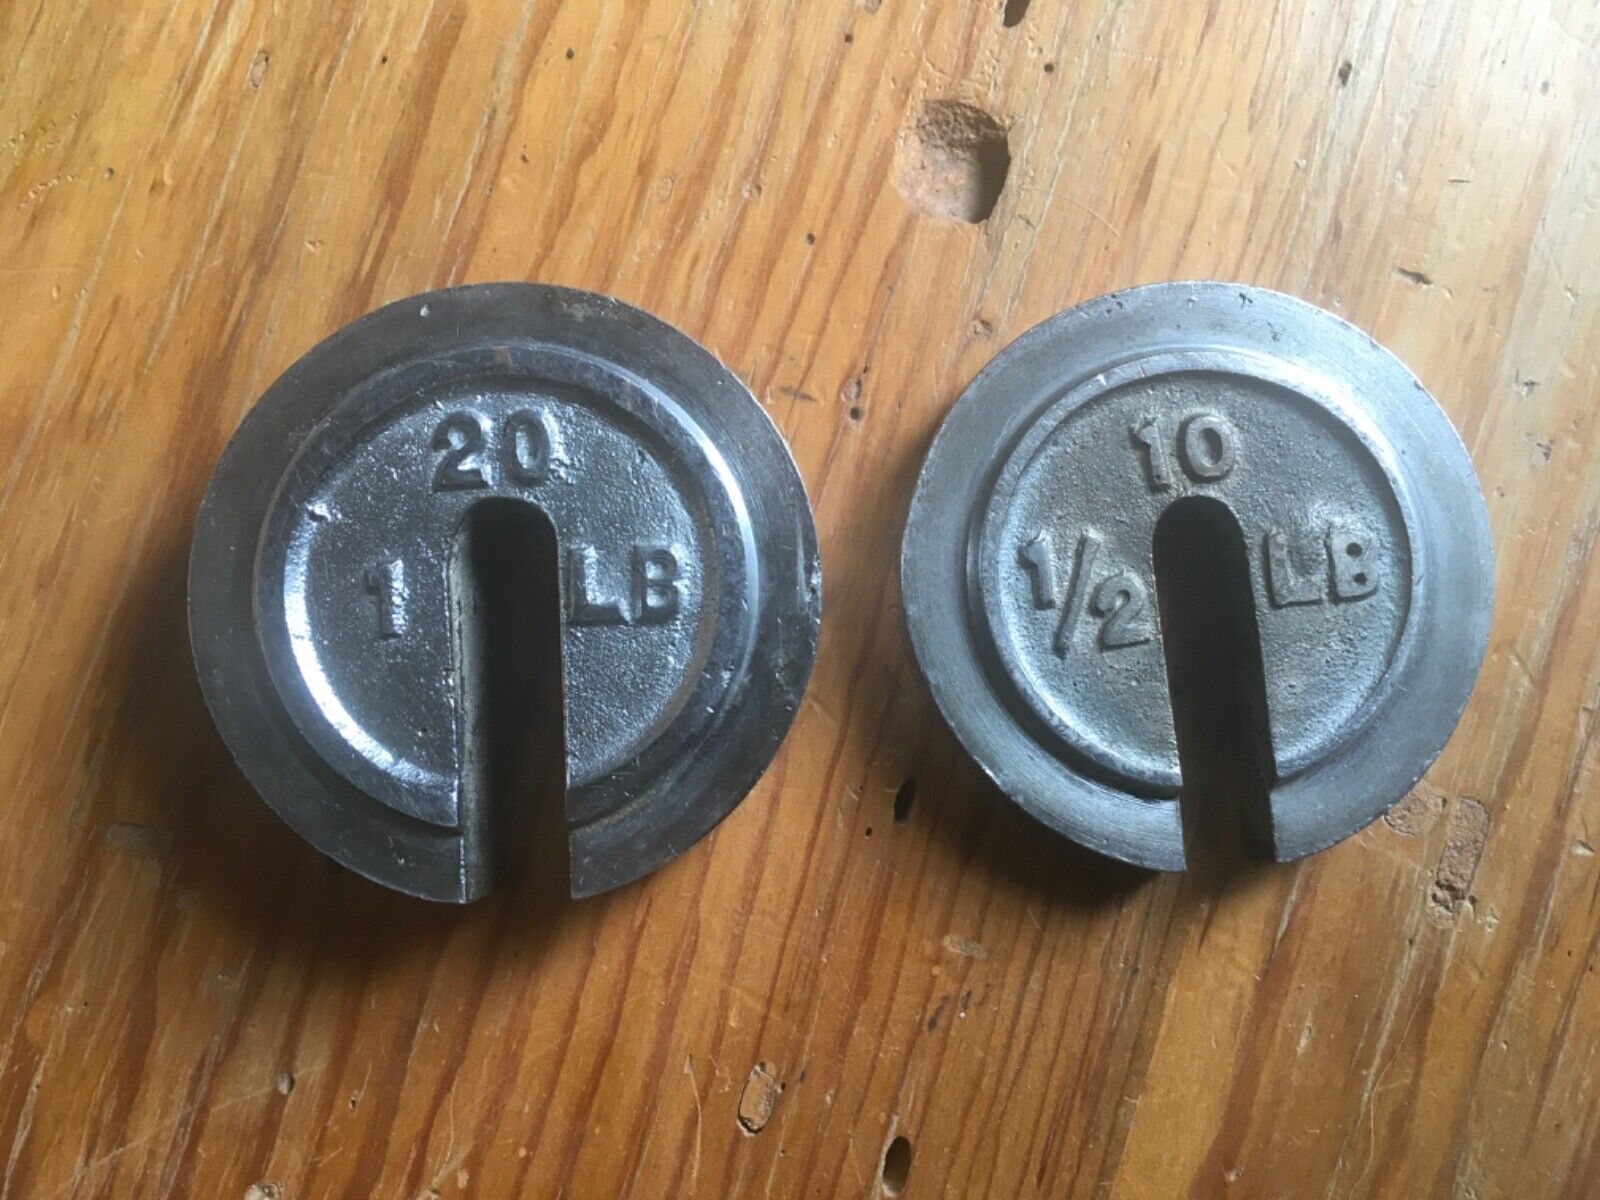 Lot of 2 Antique Solid Brass Round Slotted Counterpoise Weight 1/2 lb. & 1 lb. Без бренда - фотография #2